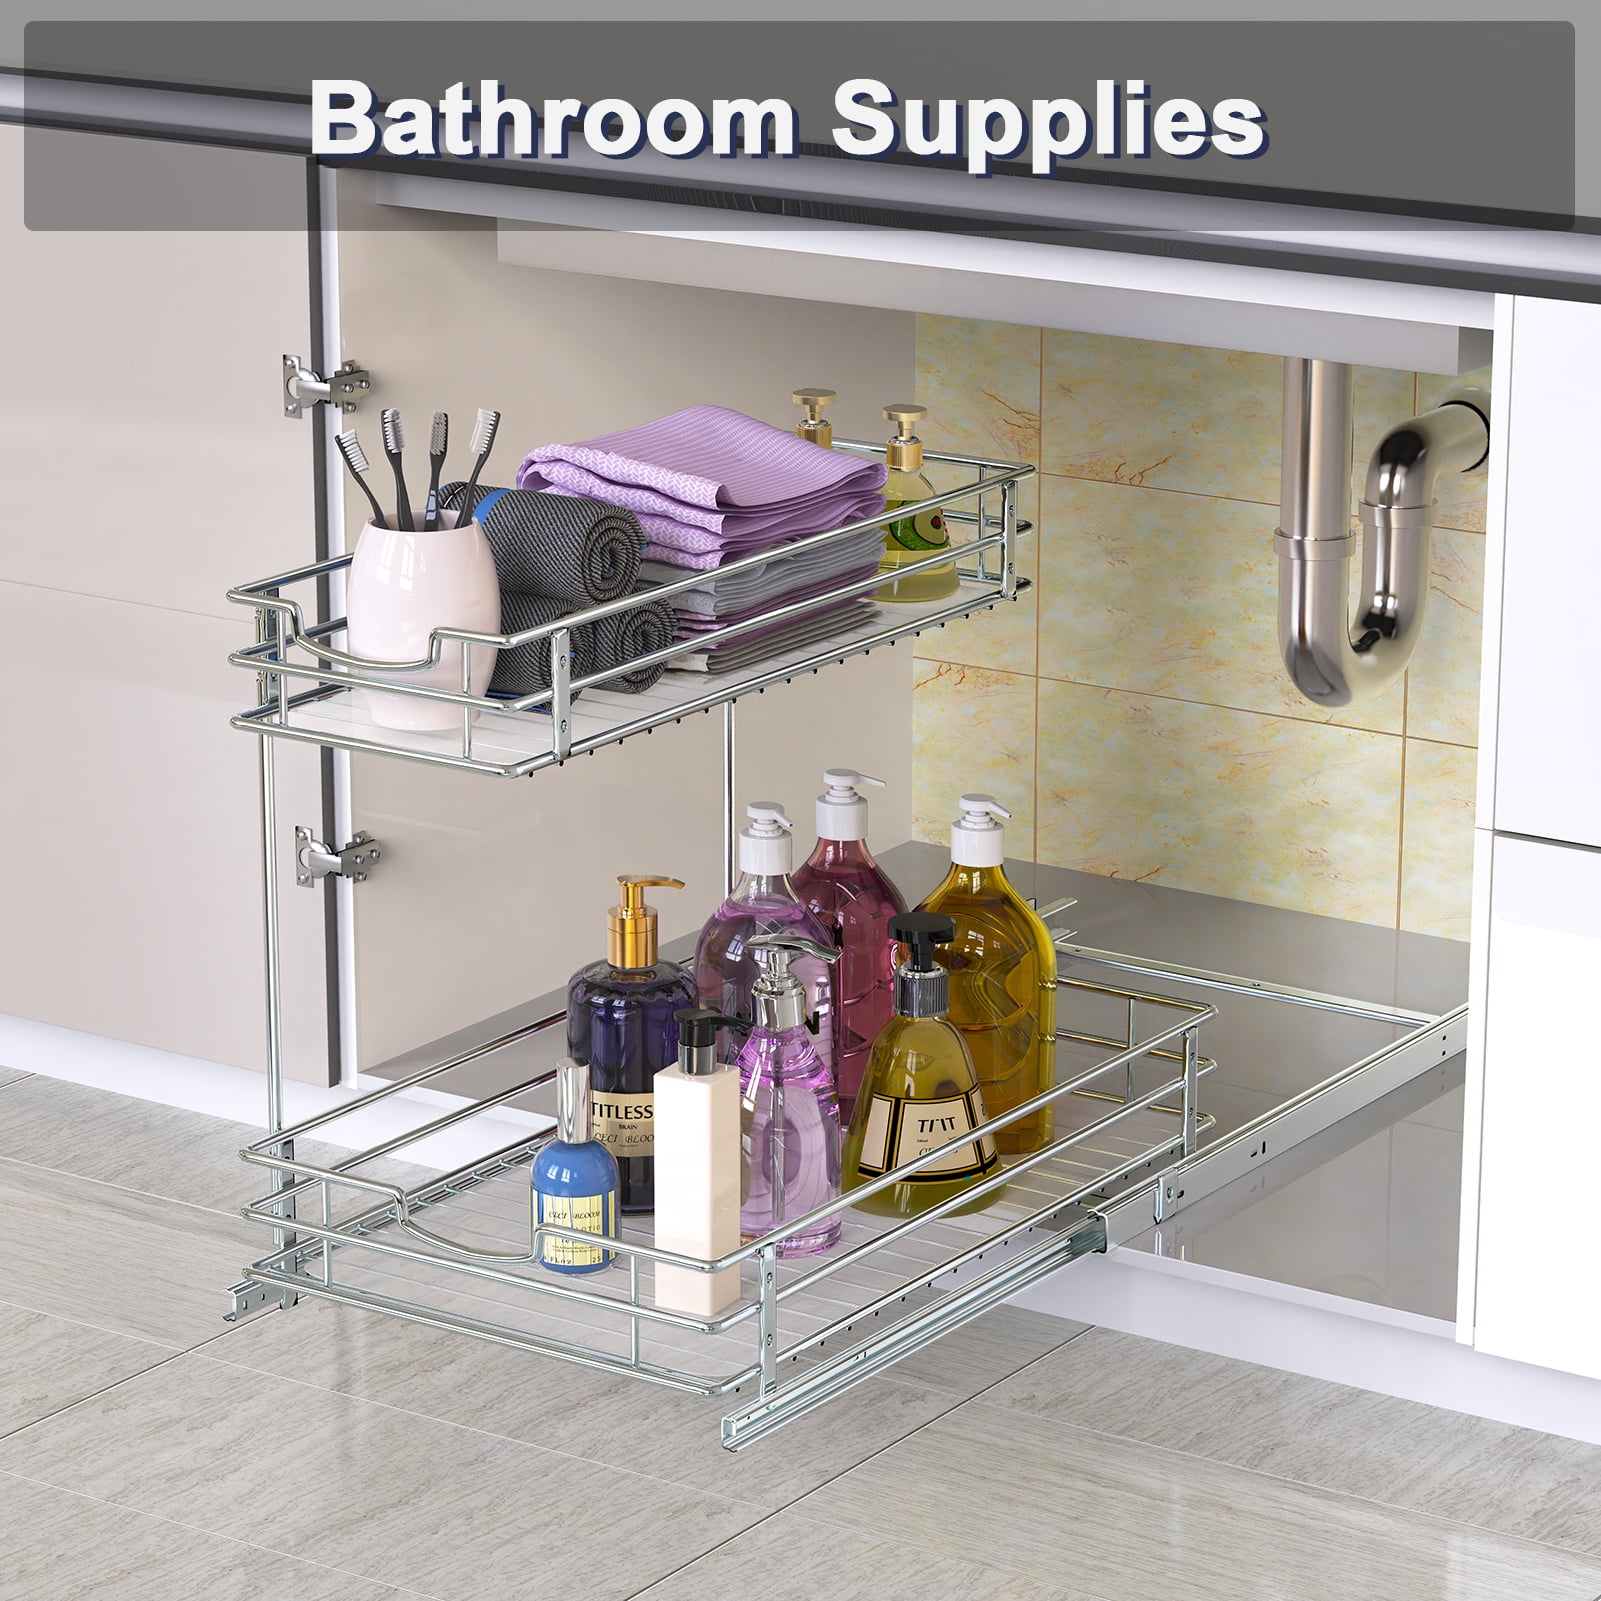 Fowooyeen 2 Pack Bathroom Cabinet Organizer, 2 Tier Pull Out Clear Under  Sink Organizers and Storage, Multi-Purpose Kitchen Pantry Medicine